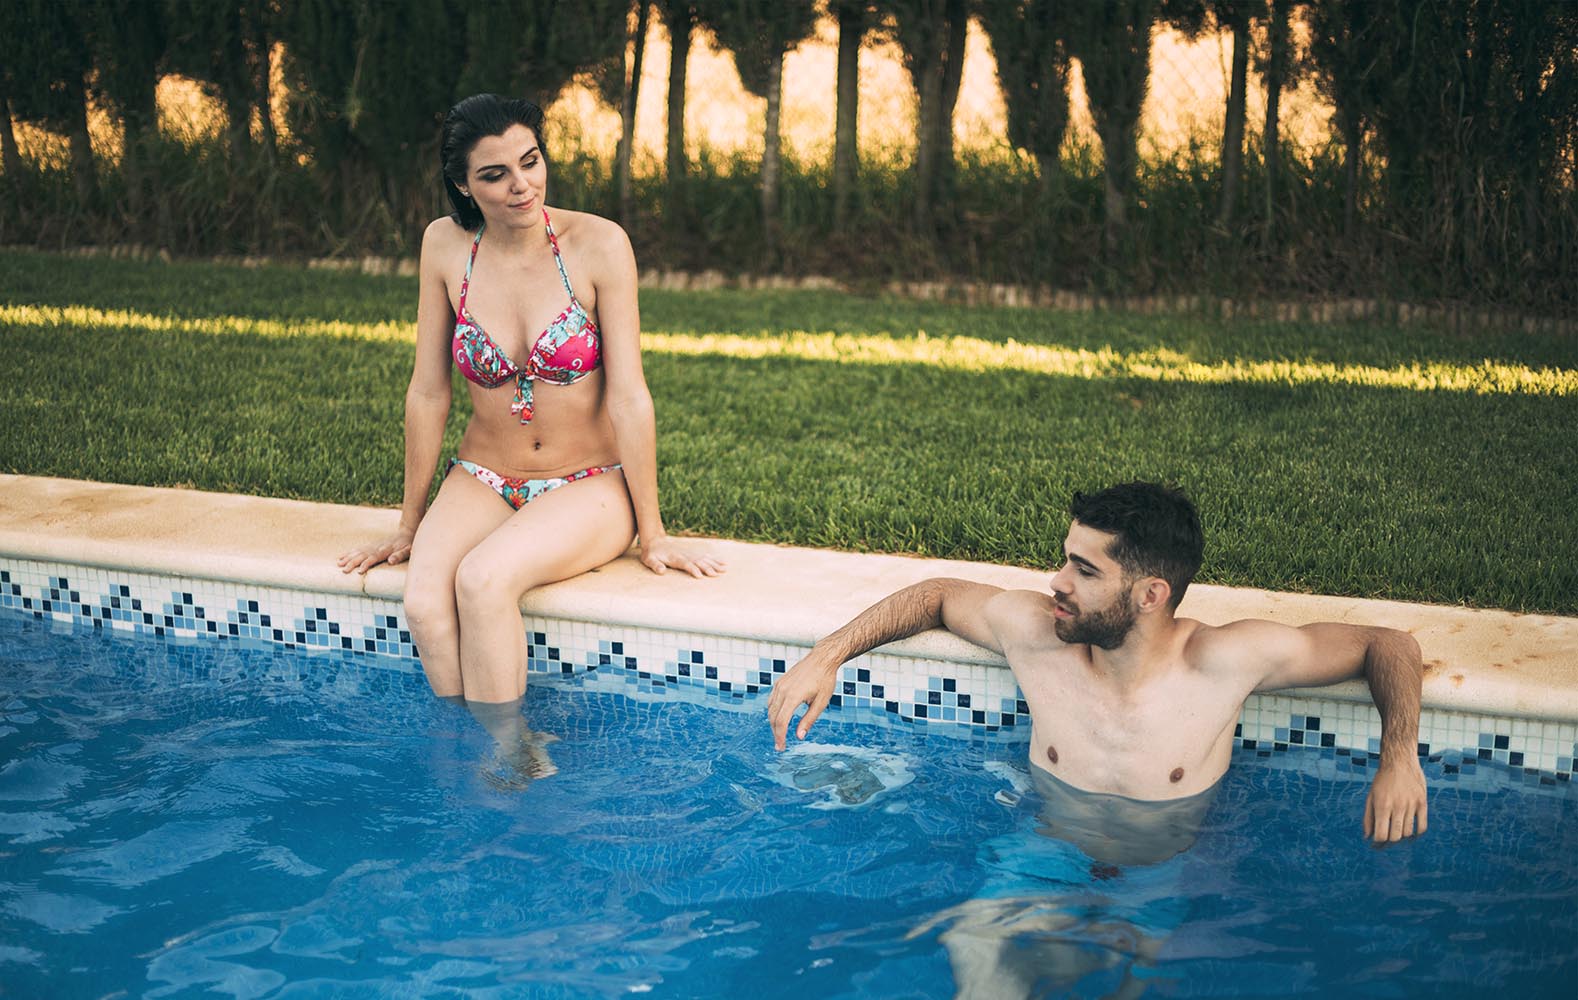 Guy swimming and girl sitting on poolside